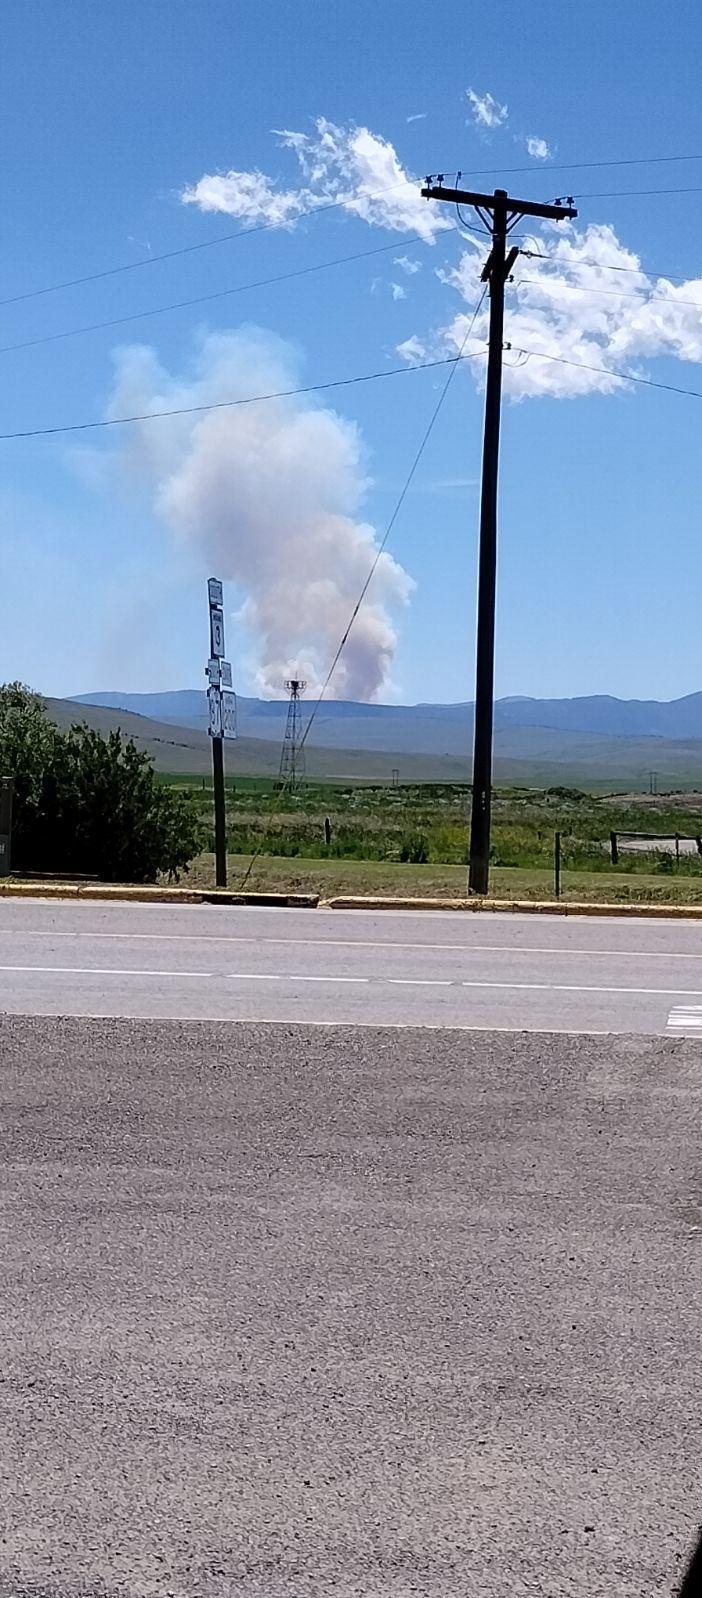 Plume of smoke from Running Wolf Fire, Tuesday, June 25 midday as seen from Highway near Stanford